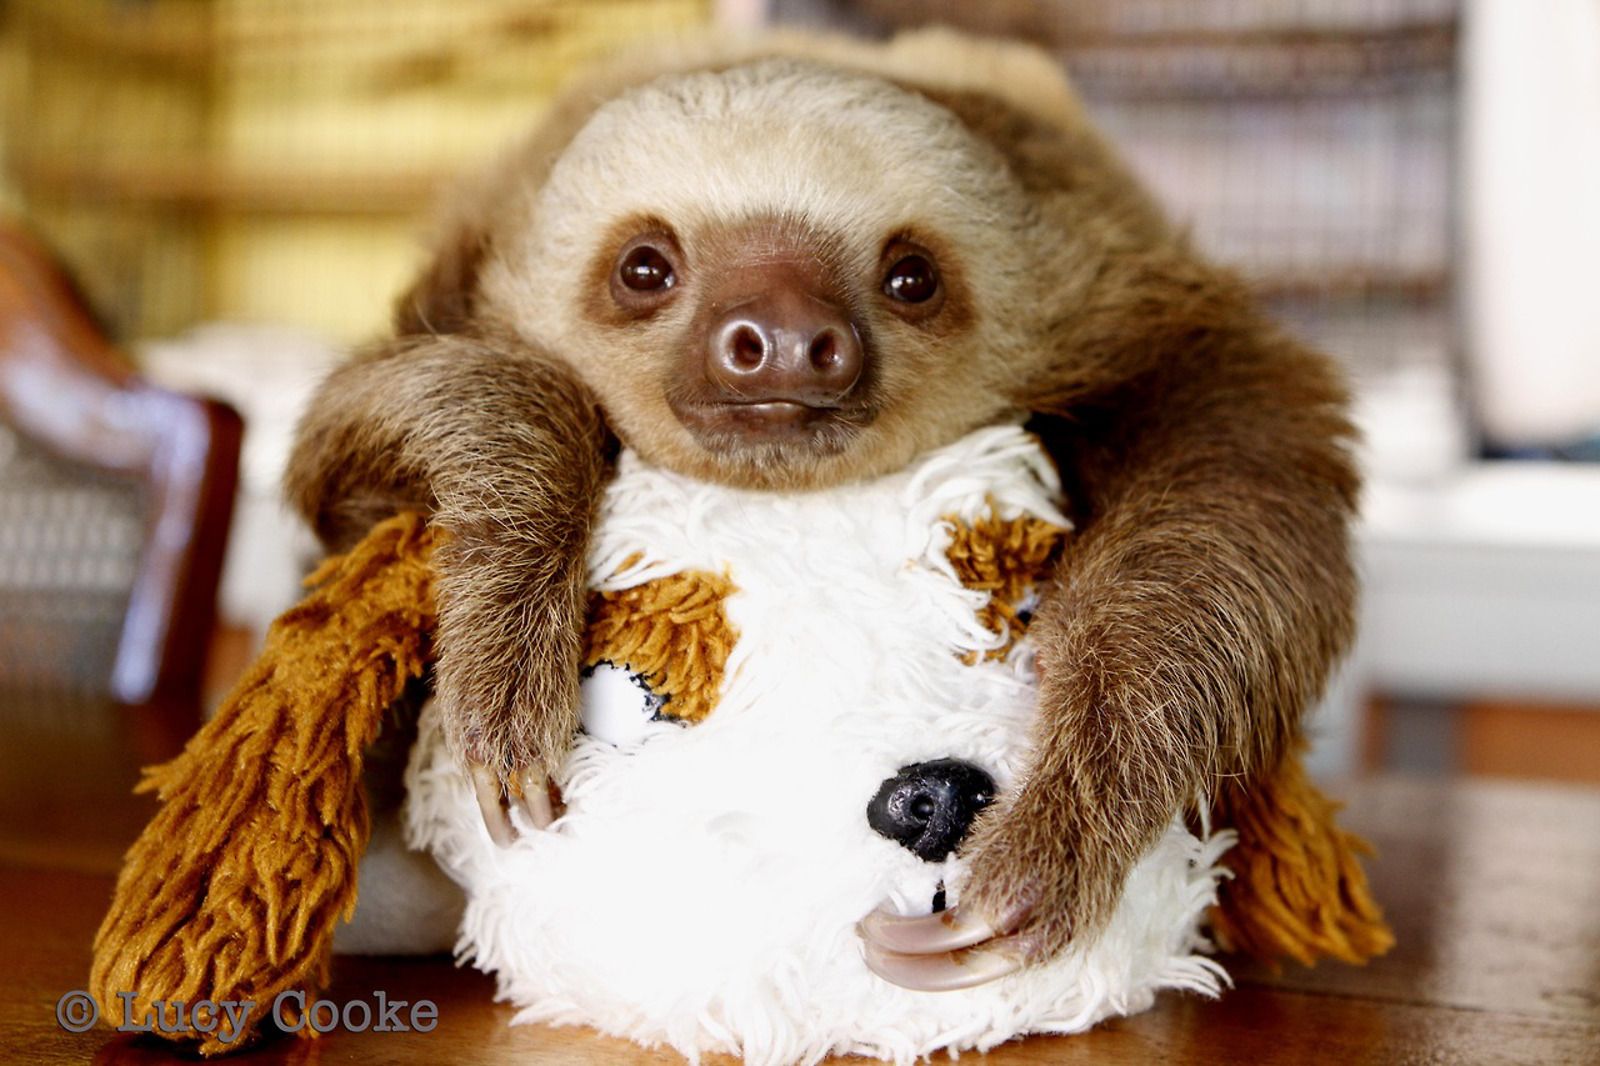 These Adorable Orphaned Baby Sloths Don't Have Moms, so They Cling